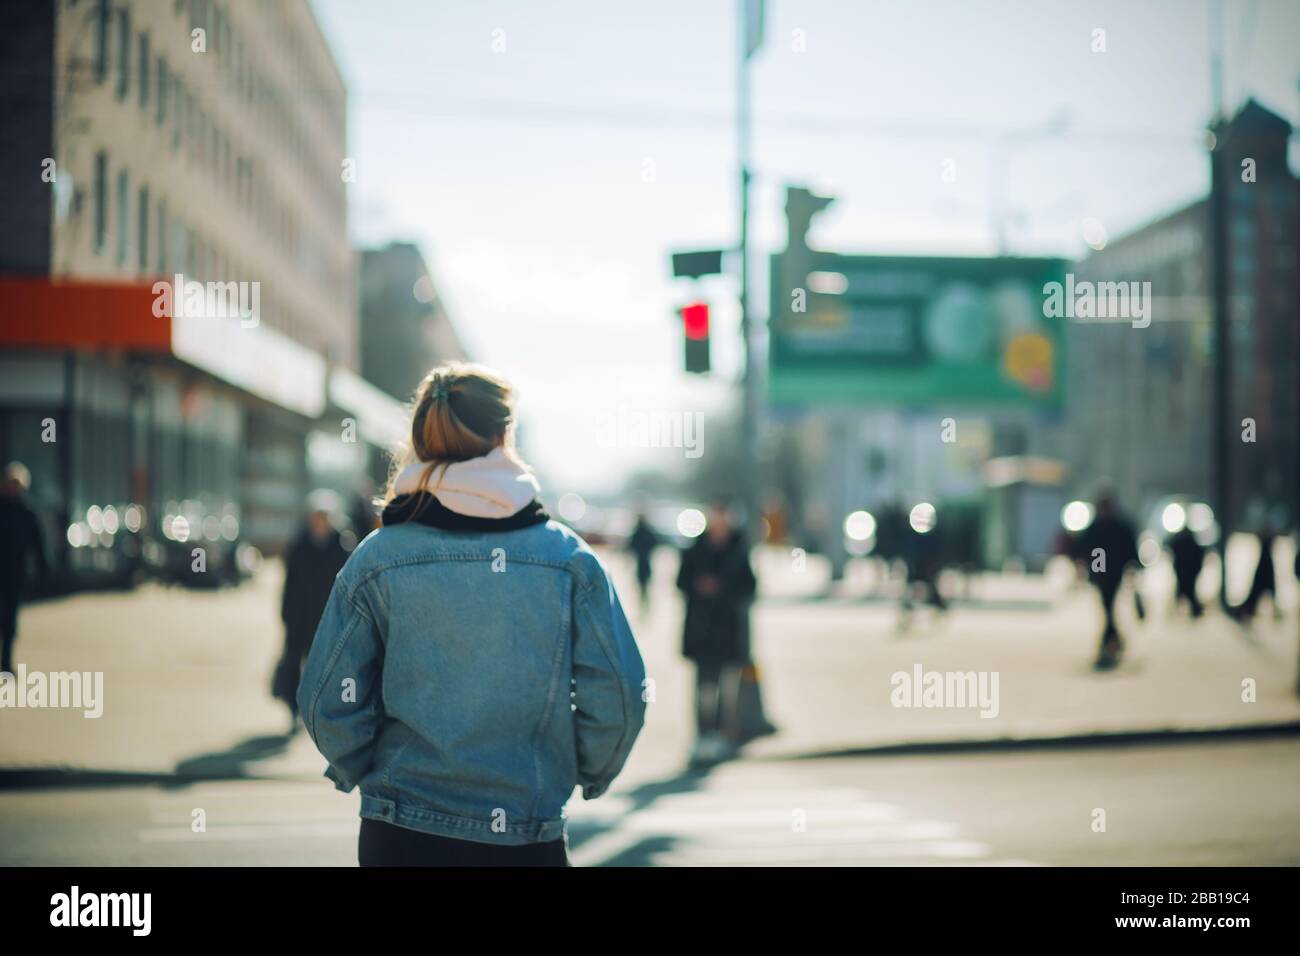 A blurry image of a girl in fashionable clothes standing in front of a pedestrian crossing and waiting for a green light on a Sunny spring day. Stock Photo